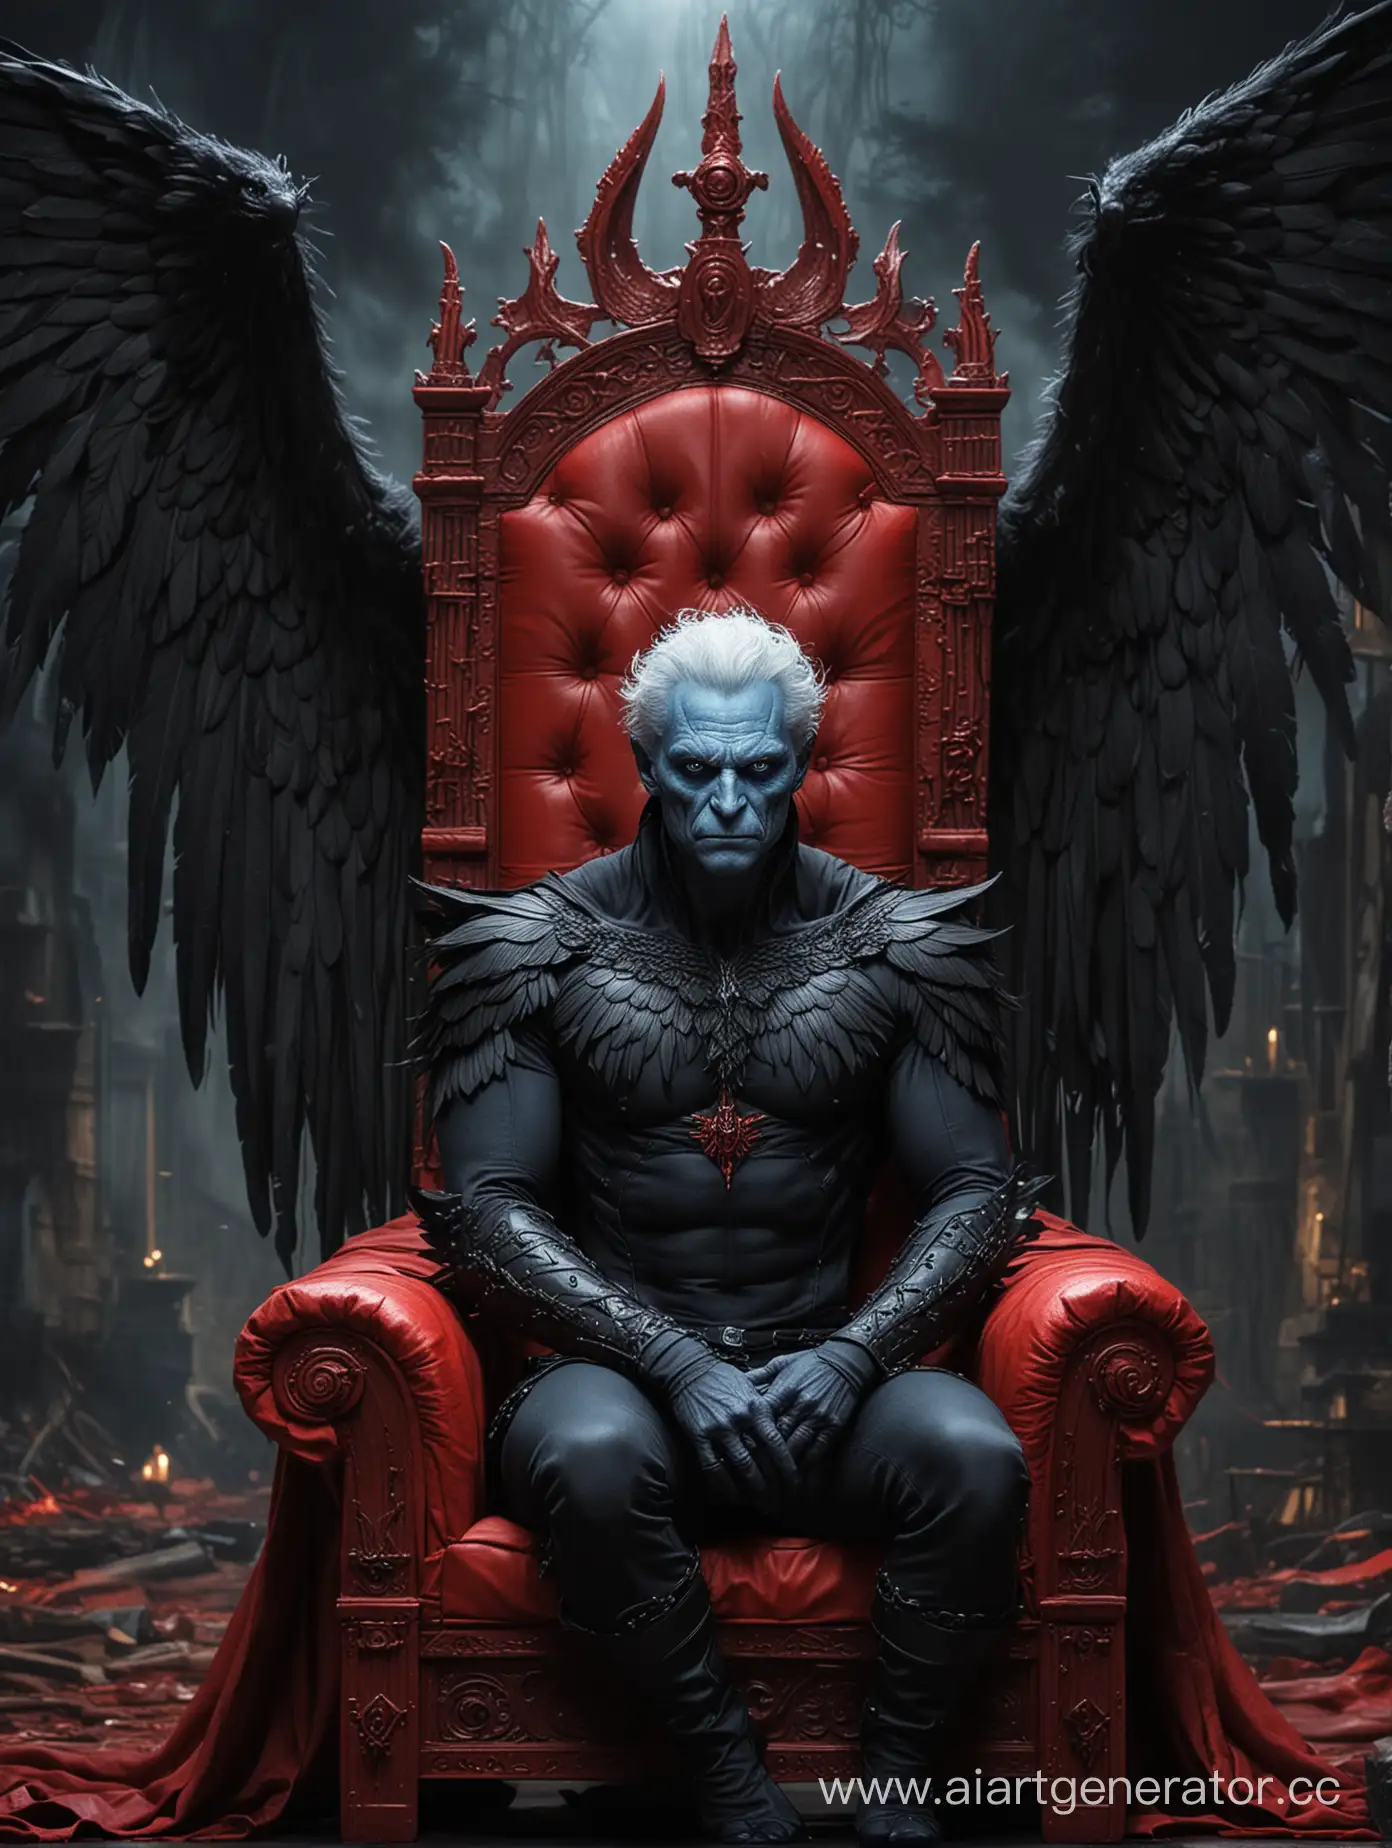 Supernatural-Boogeyman-with-Blue-Eyes-Sitting-on-Red-Throne